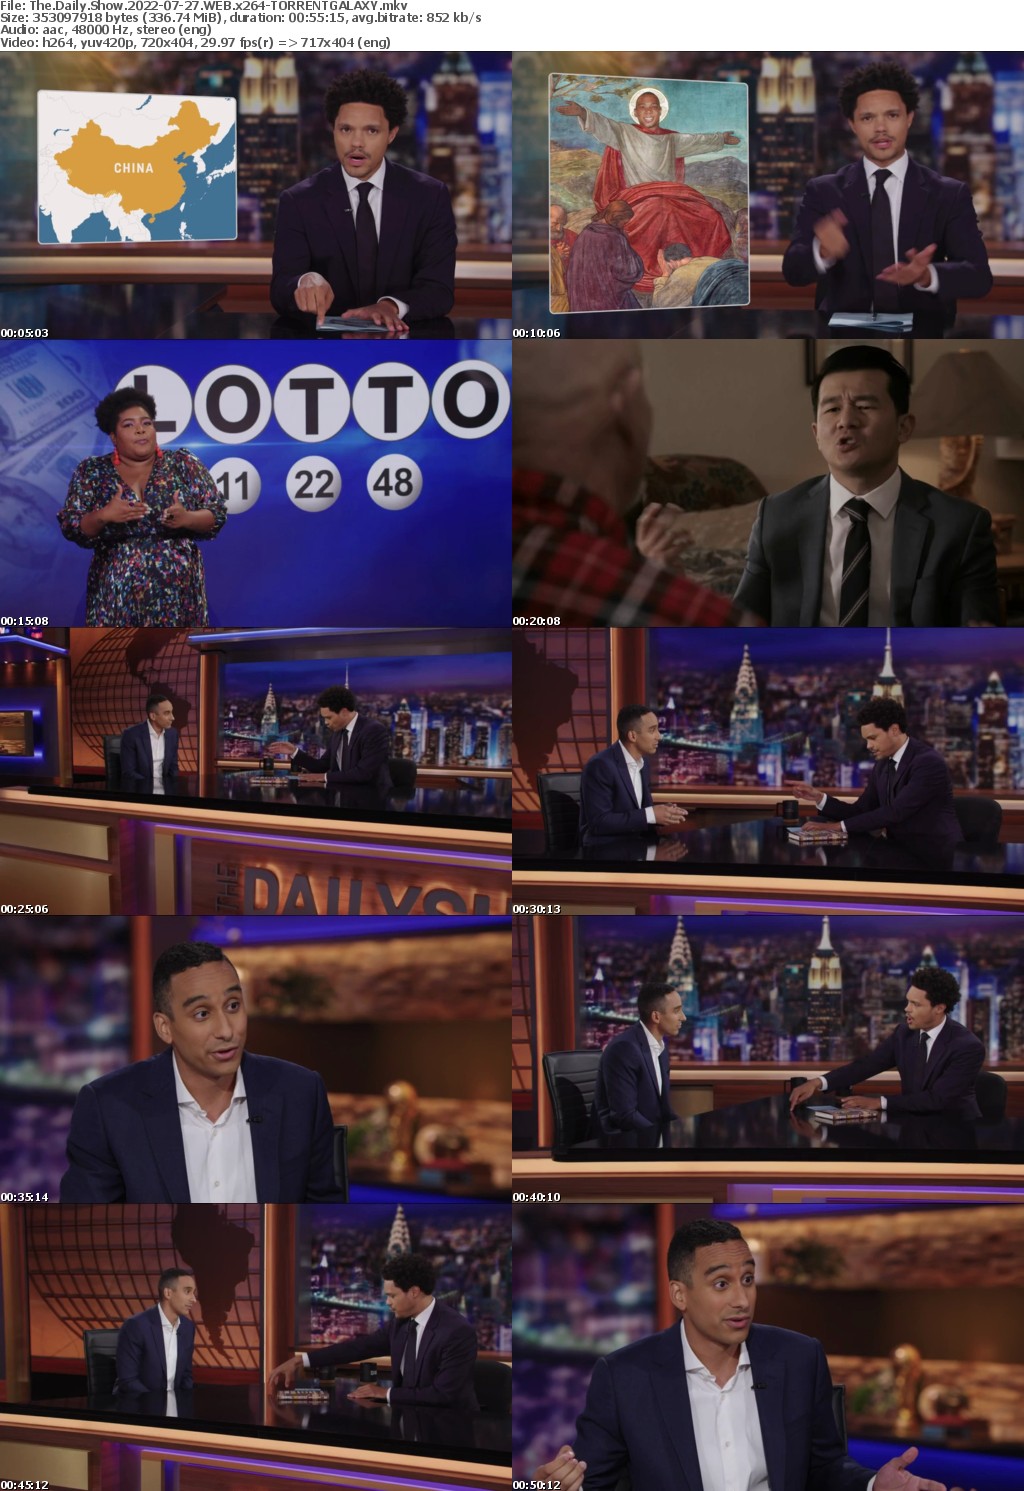 The Daily Show 2022-07-27 WEB x264-GALAXY